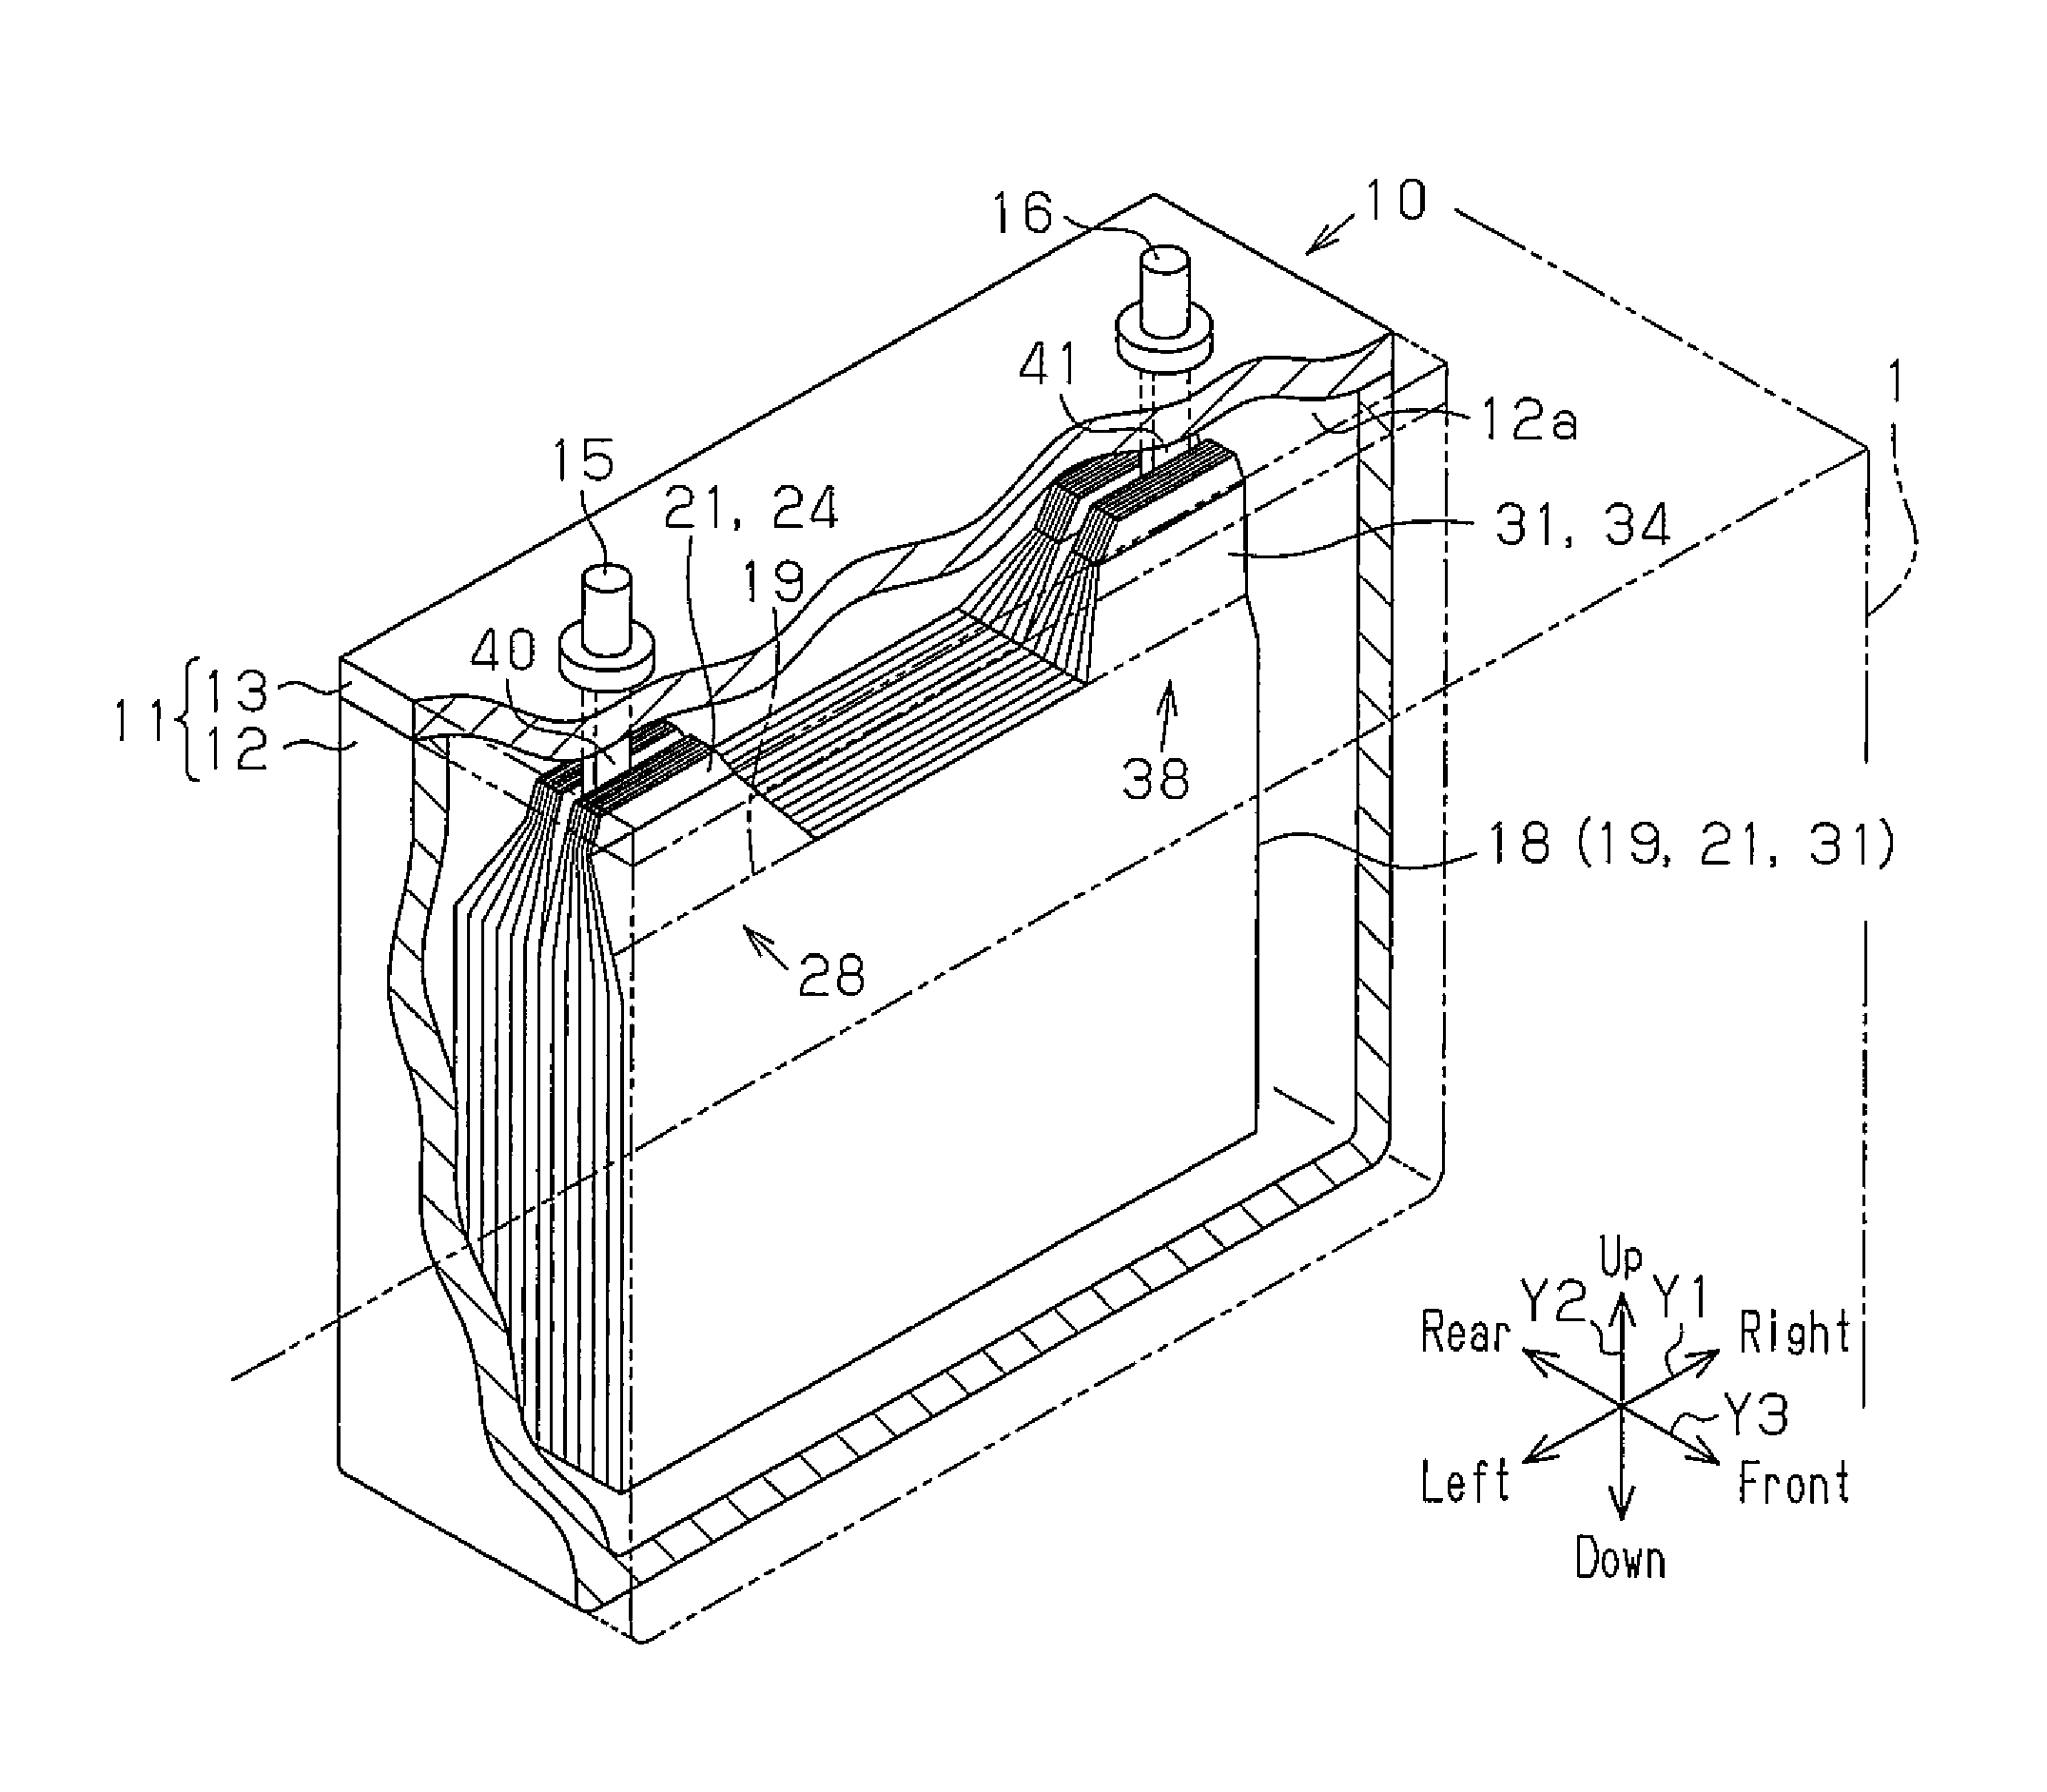 Power storage apparatus and vehicle with power storage apparatus mounted thereon